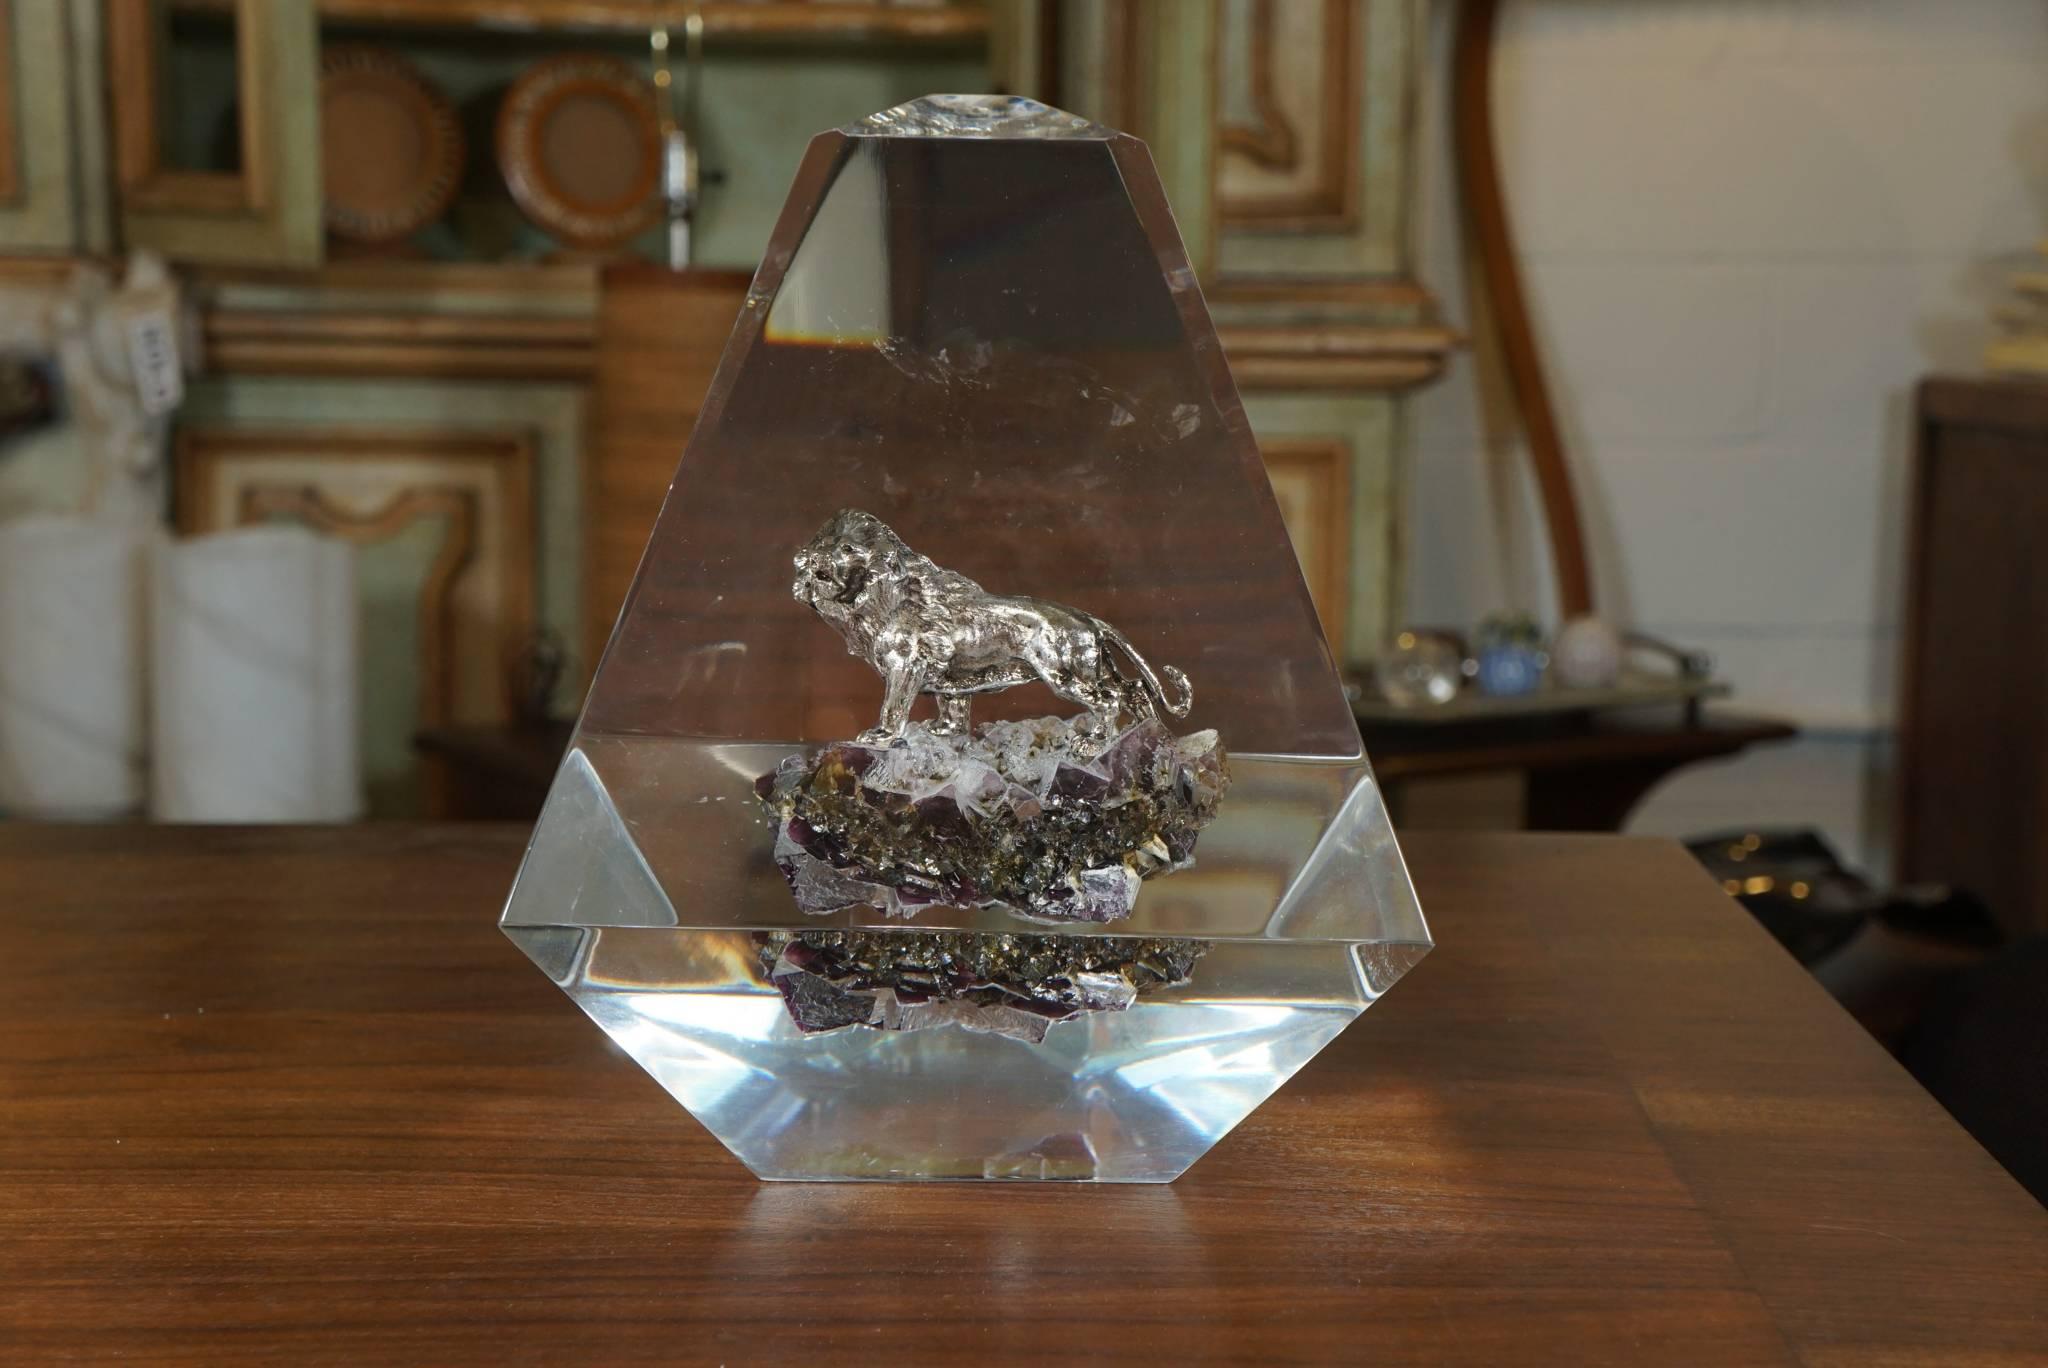 Here is an amazing lucite obelisk sculpture with an encased silver lion standing on an amethyst specimen. Thoroughly modern, this piece is in the style of Allesandro Albrezzi and Pierre Geuridon.